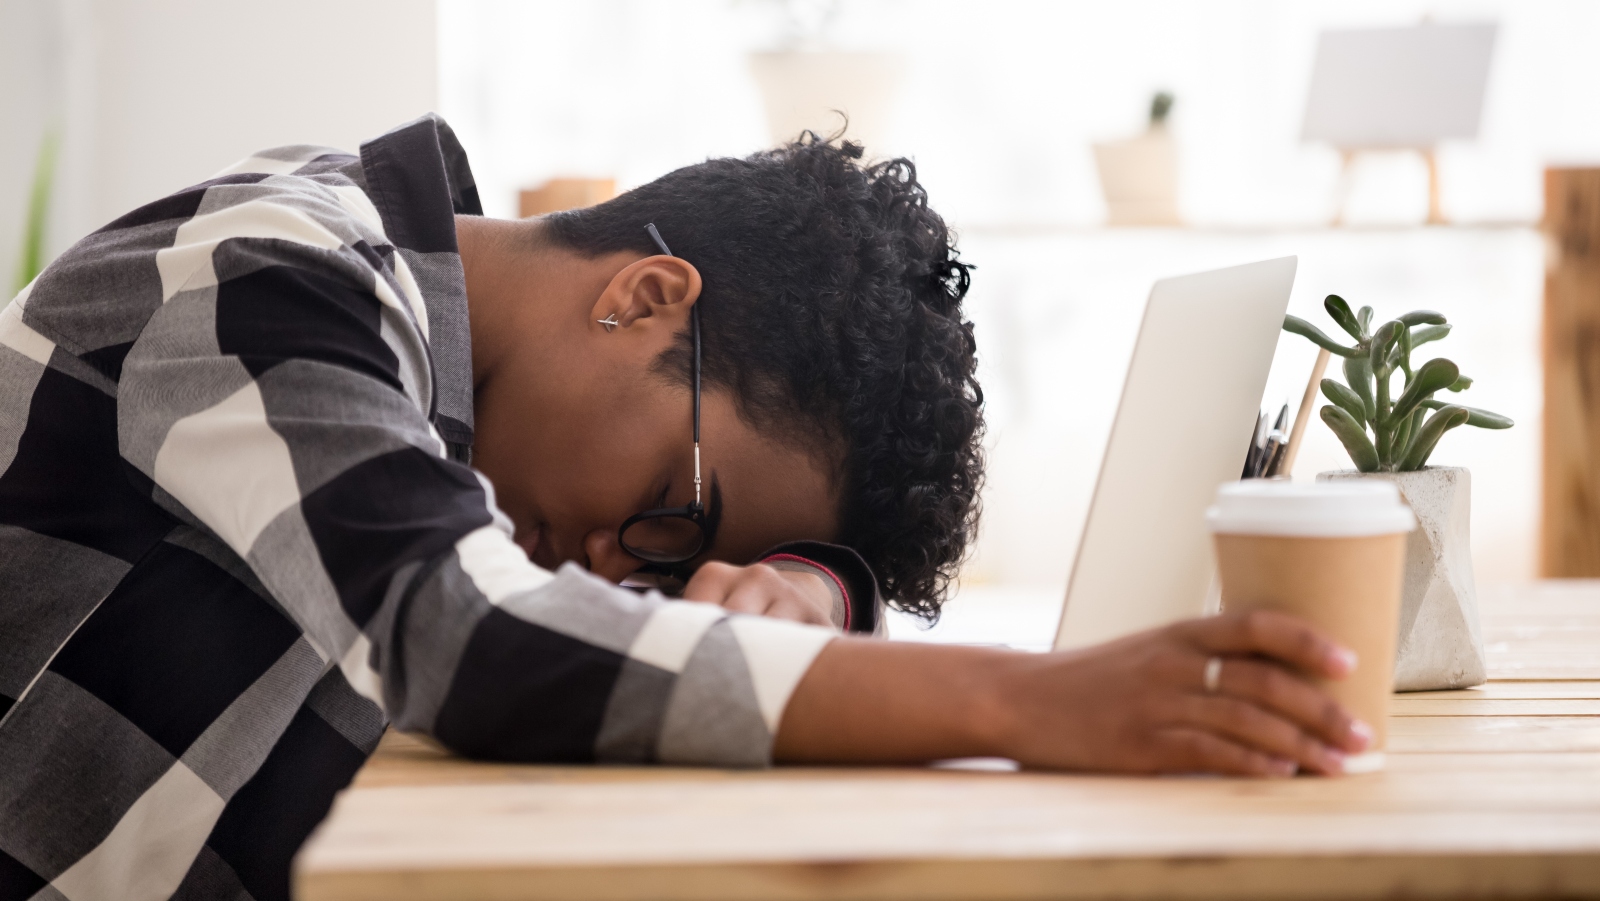 Illustrative image of a tired employee via Shutterstock.com